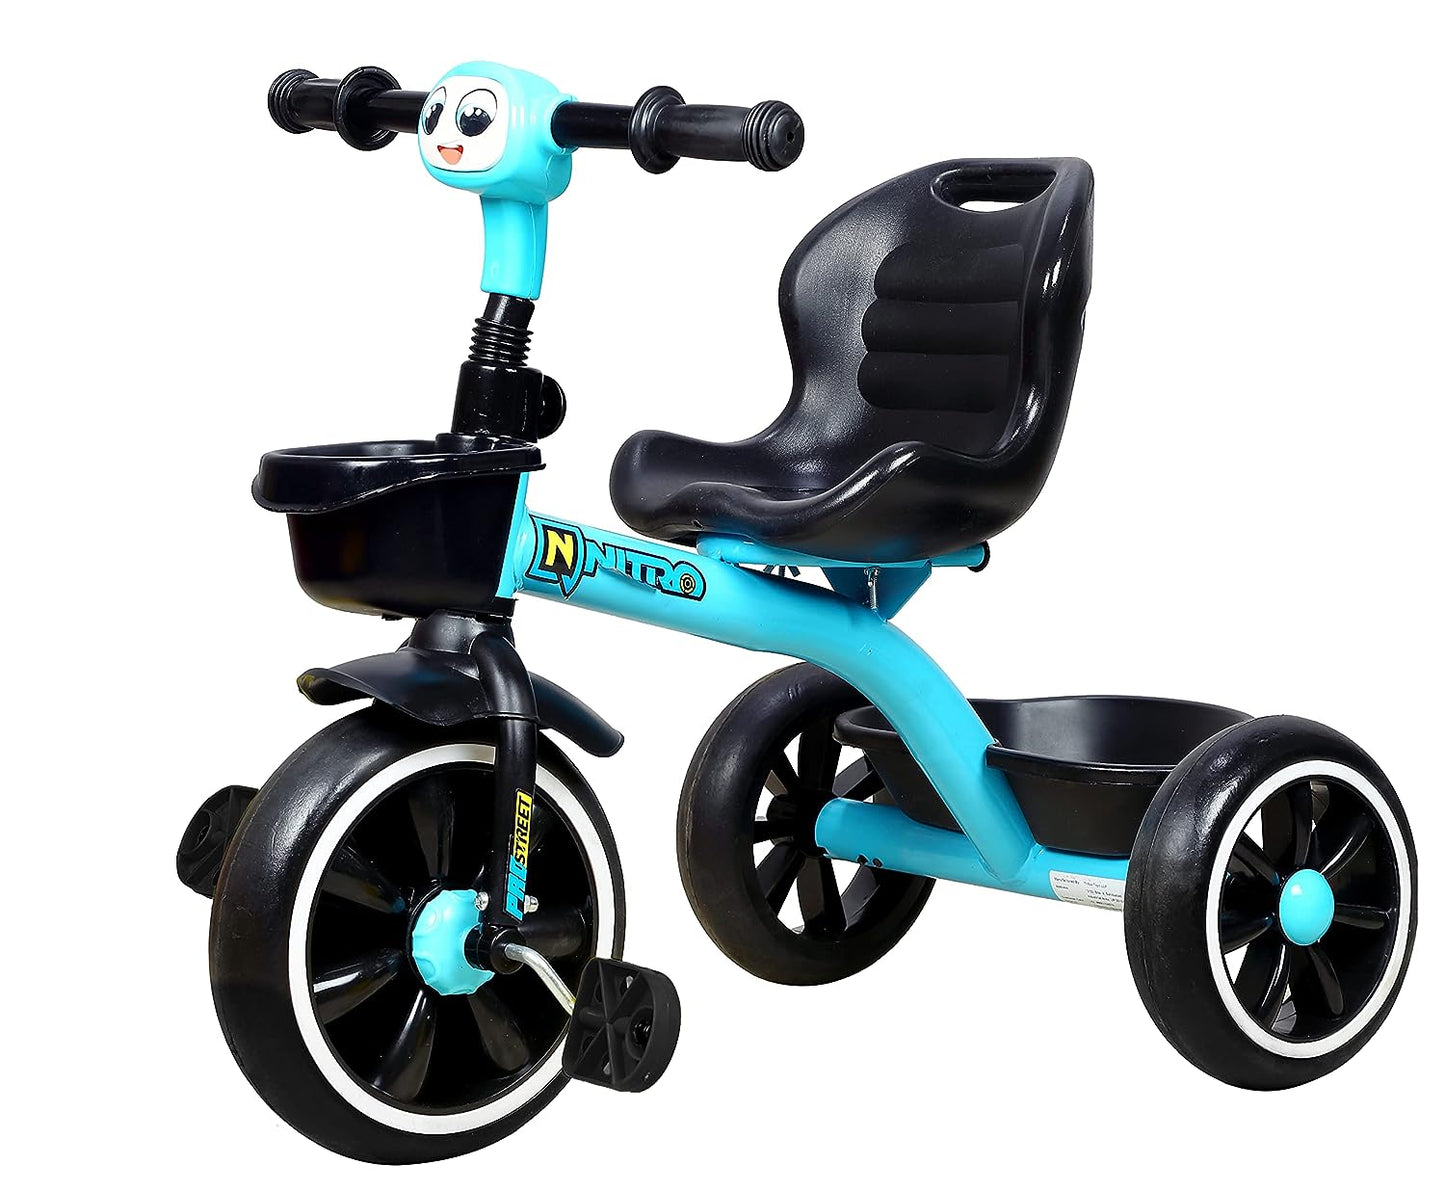 Luusa Nitro 250 TRICYCLE: A Fun and Sturdy Metal Baby Cycle with Cartoon Charm Blue